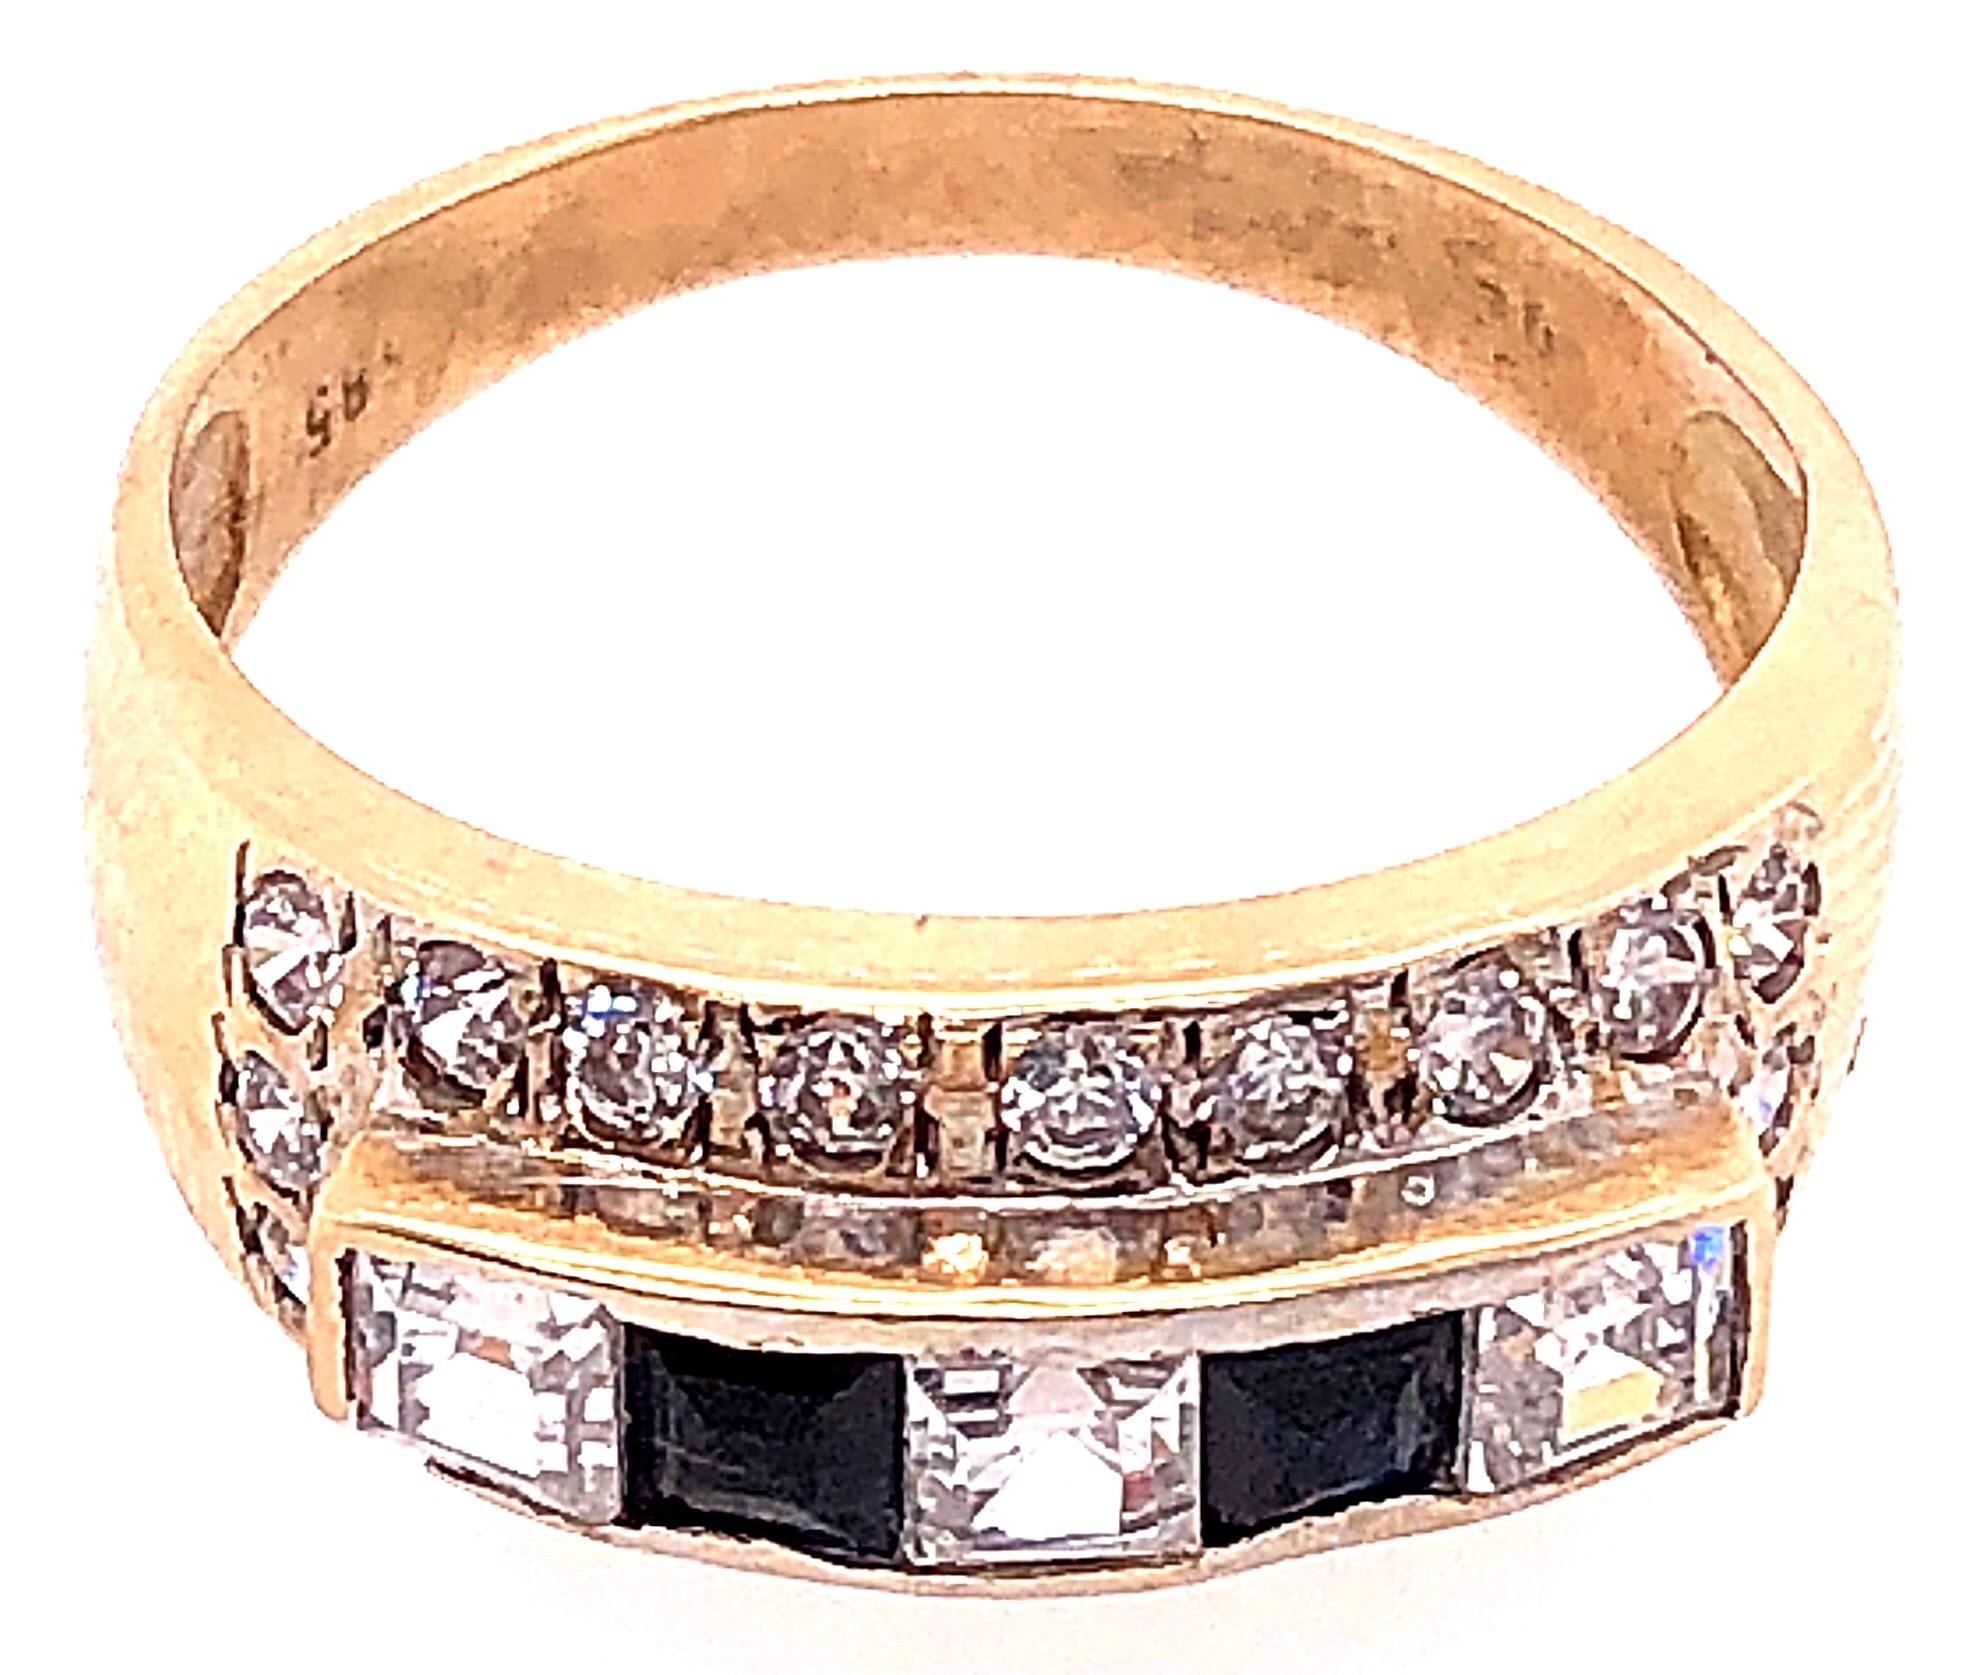 14 Karat Yellow Gold Fashion Ring with Onyx and Round Diamonds.
2 piece square cut onyx
20 piece round diamonds with 1.00 total diamond weight.
3 piece square cut diamond with 0.50 total diamond weight.
Size 7.5
 Height: 9 mm
4.04 grams total